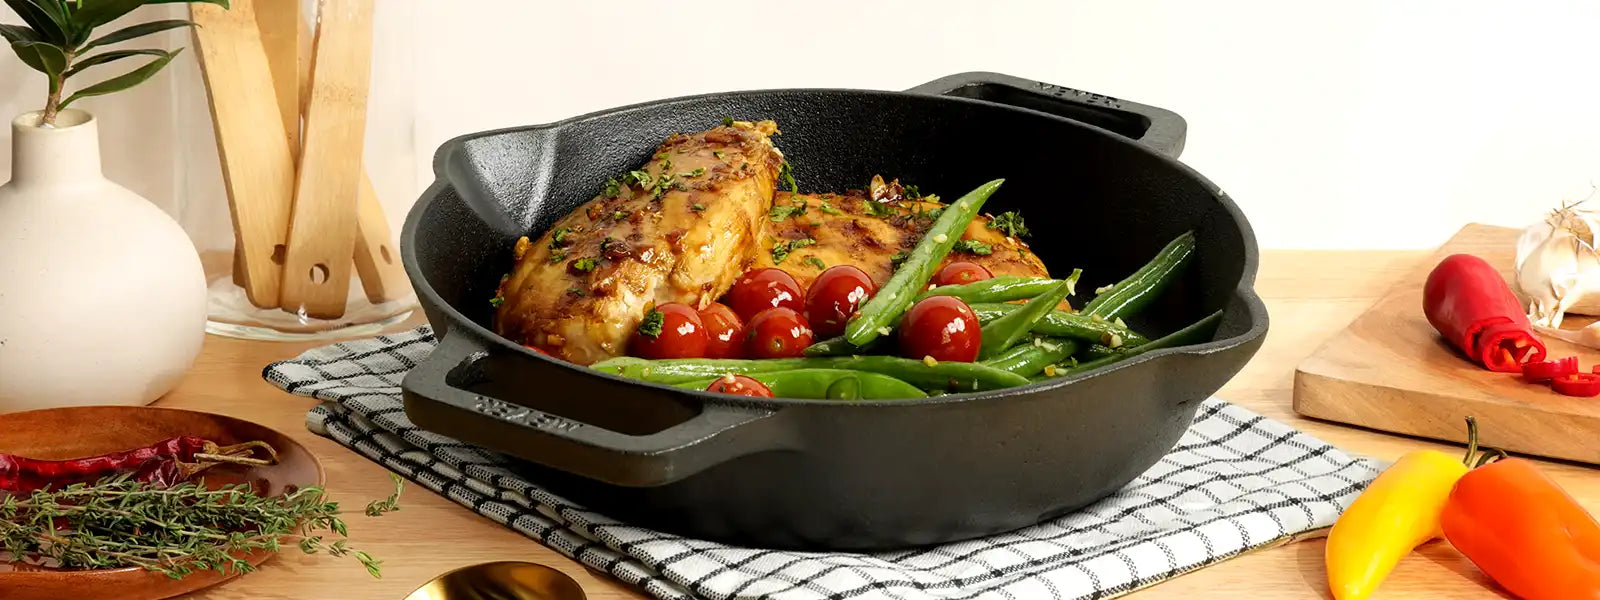 What can you cook in a Cast Iron Skillet?